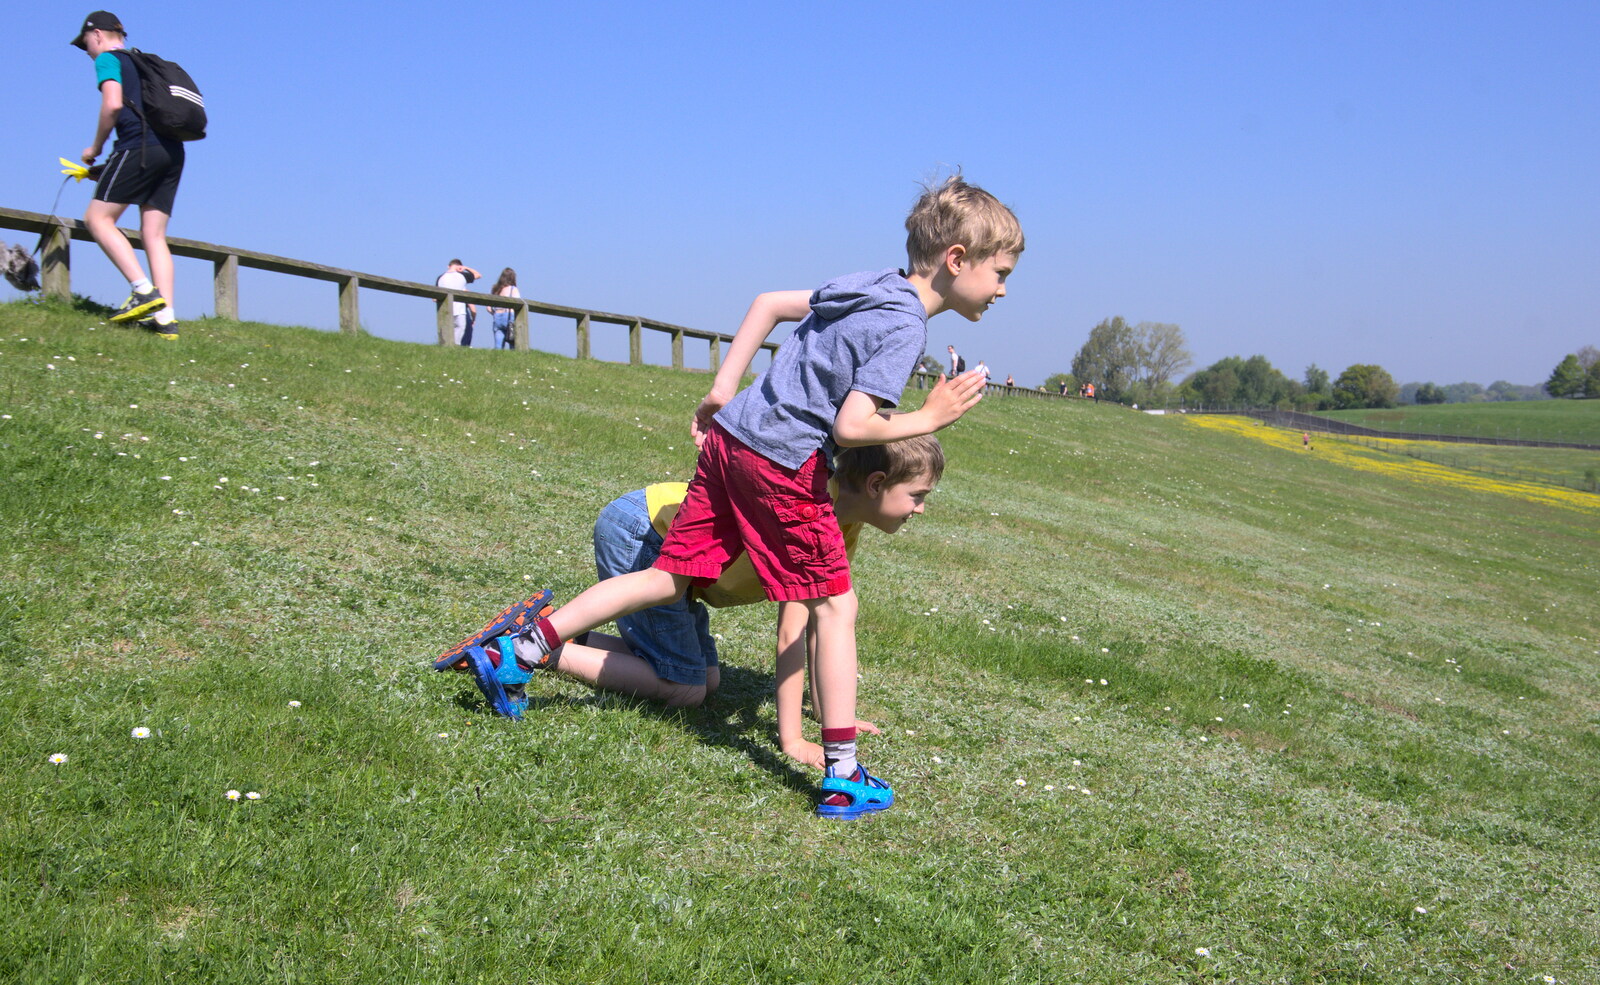 The boys have a race down the dam's earth bank from Isobel's 10km Run, Alton Water, Stutton, Suffolk - 6th May 2018